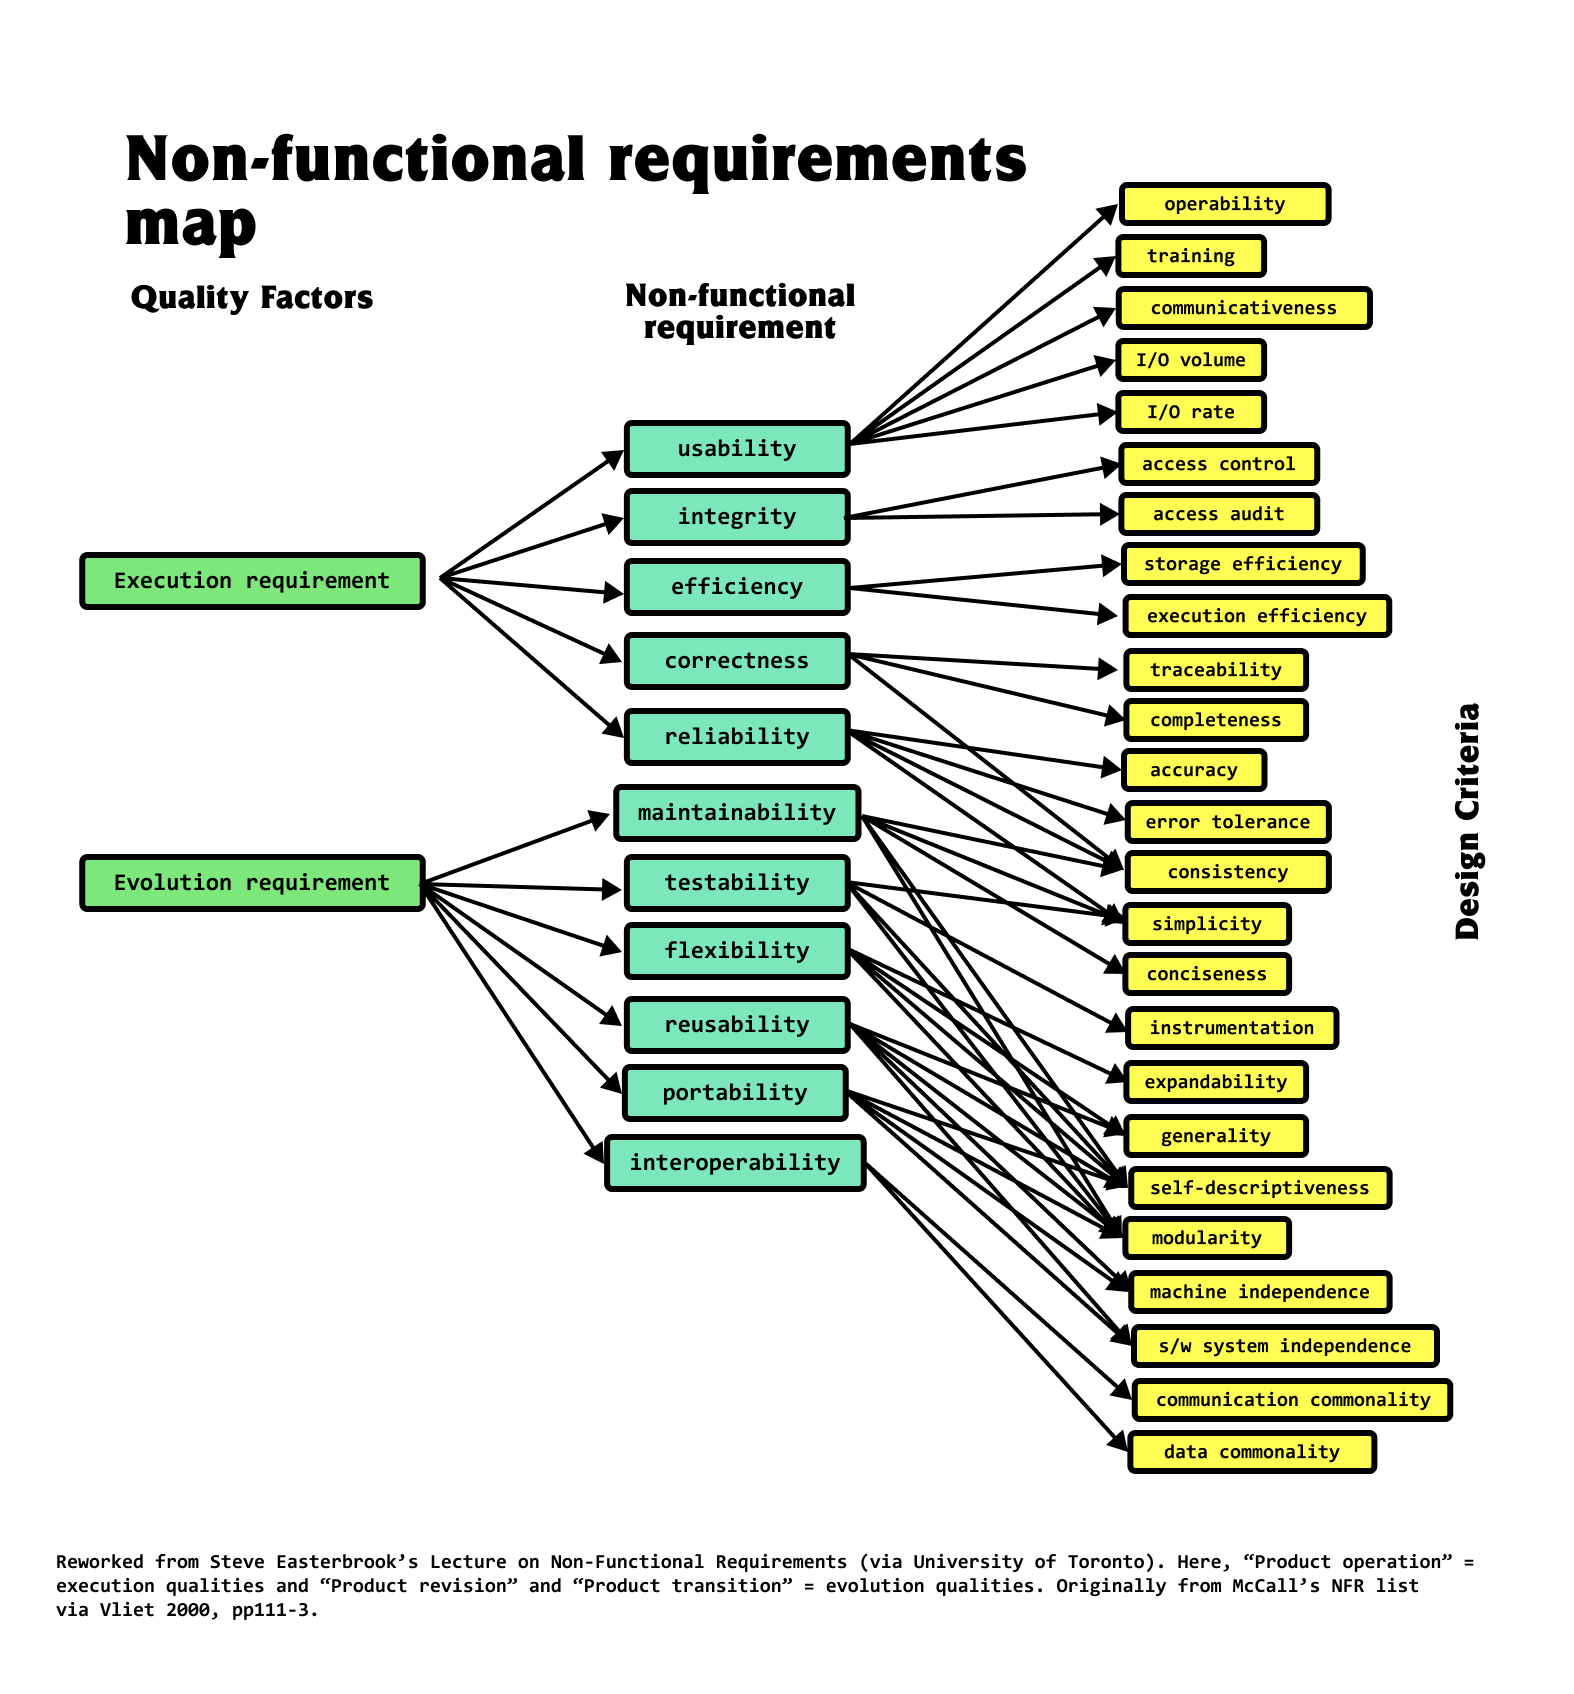 Non-functional requirements map